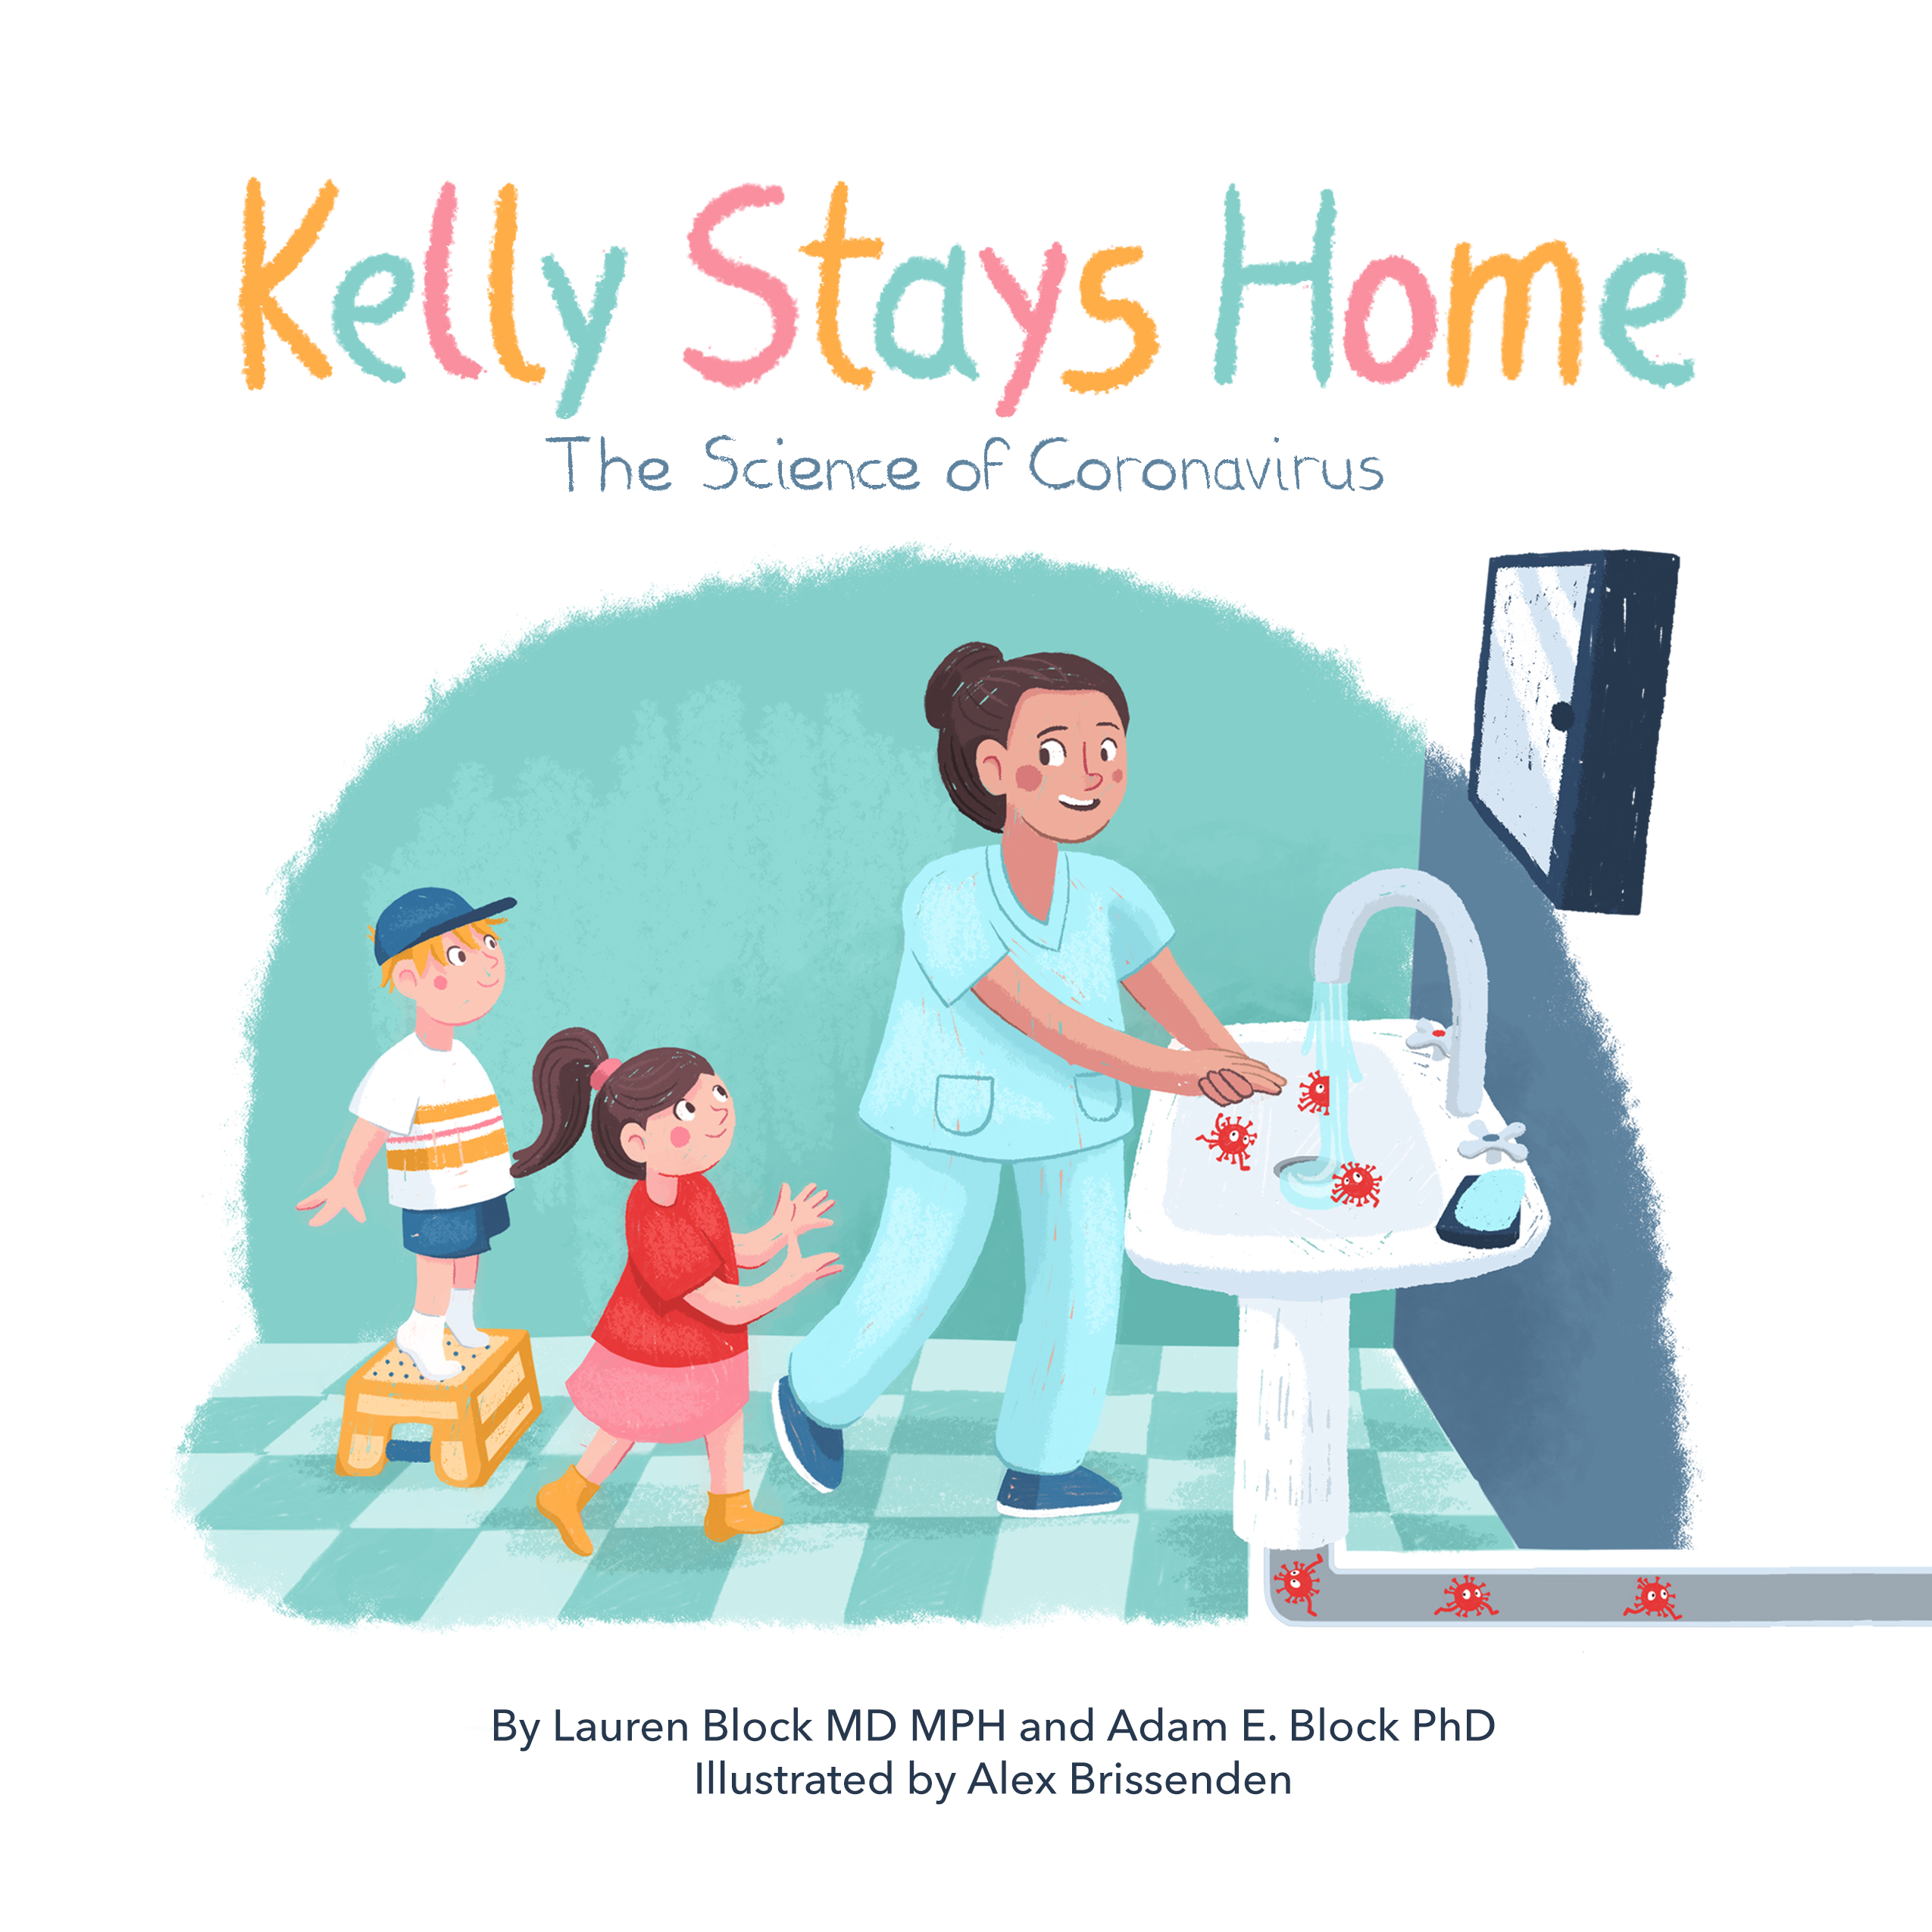 Book Cover Reading "Kelly Stays Home: The Science of Coronavirus"
<br />